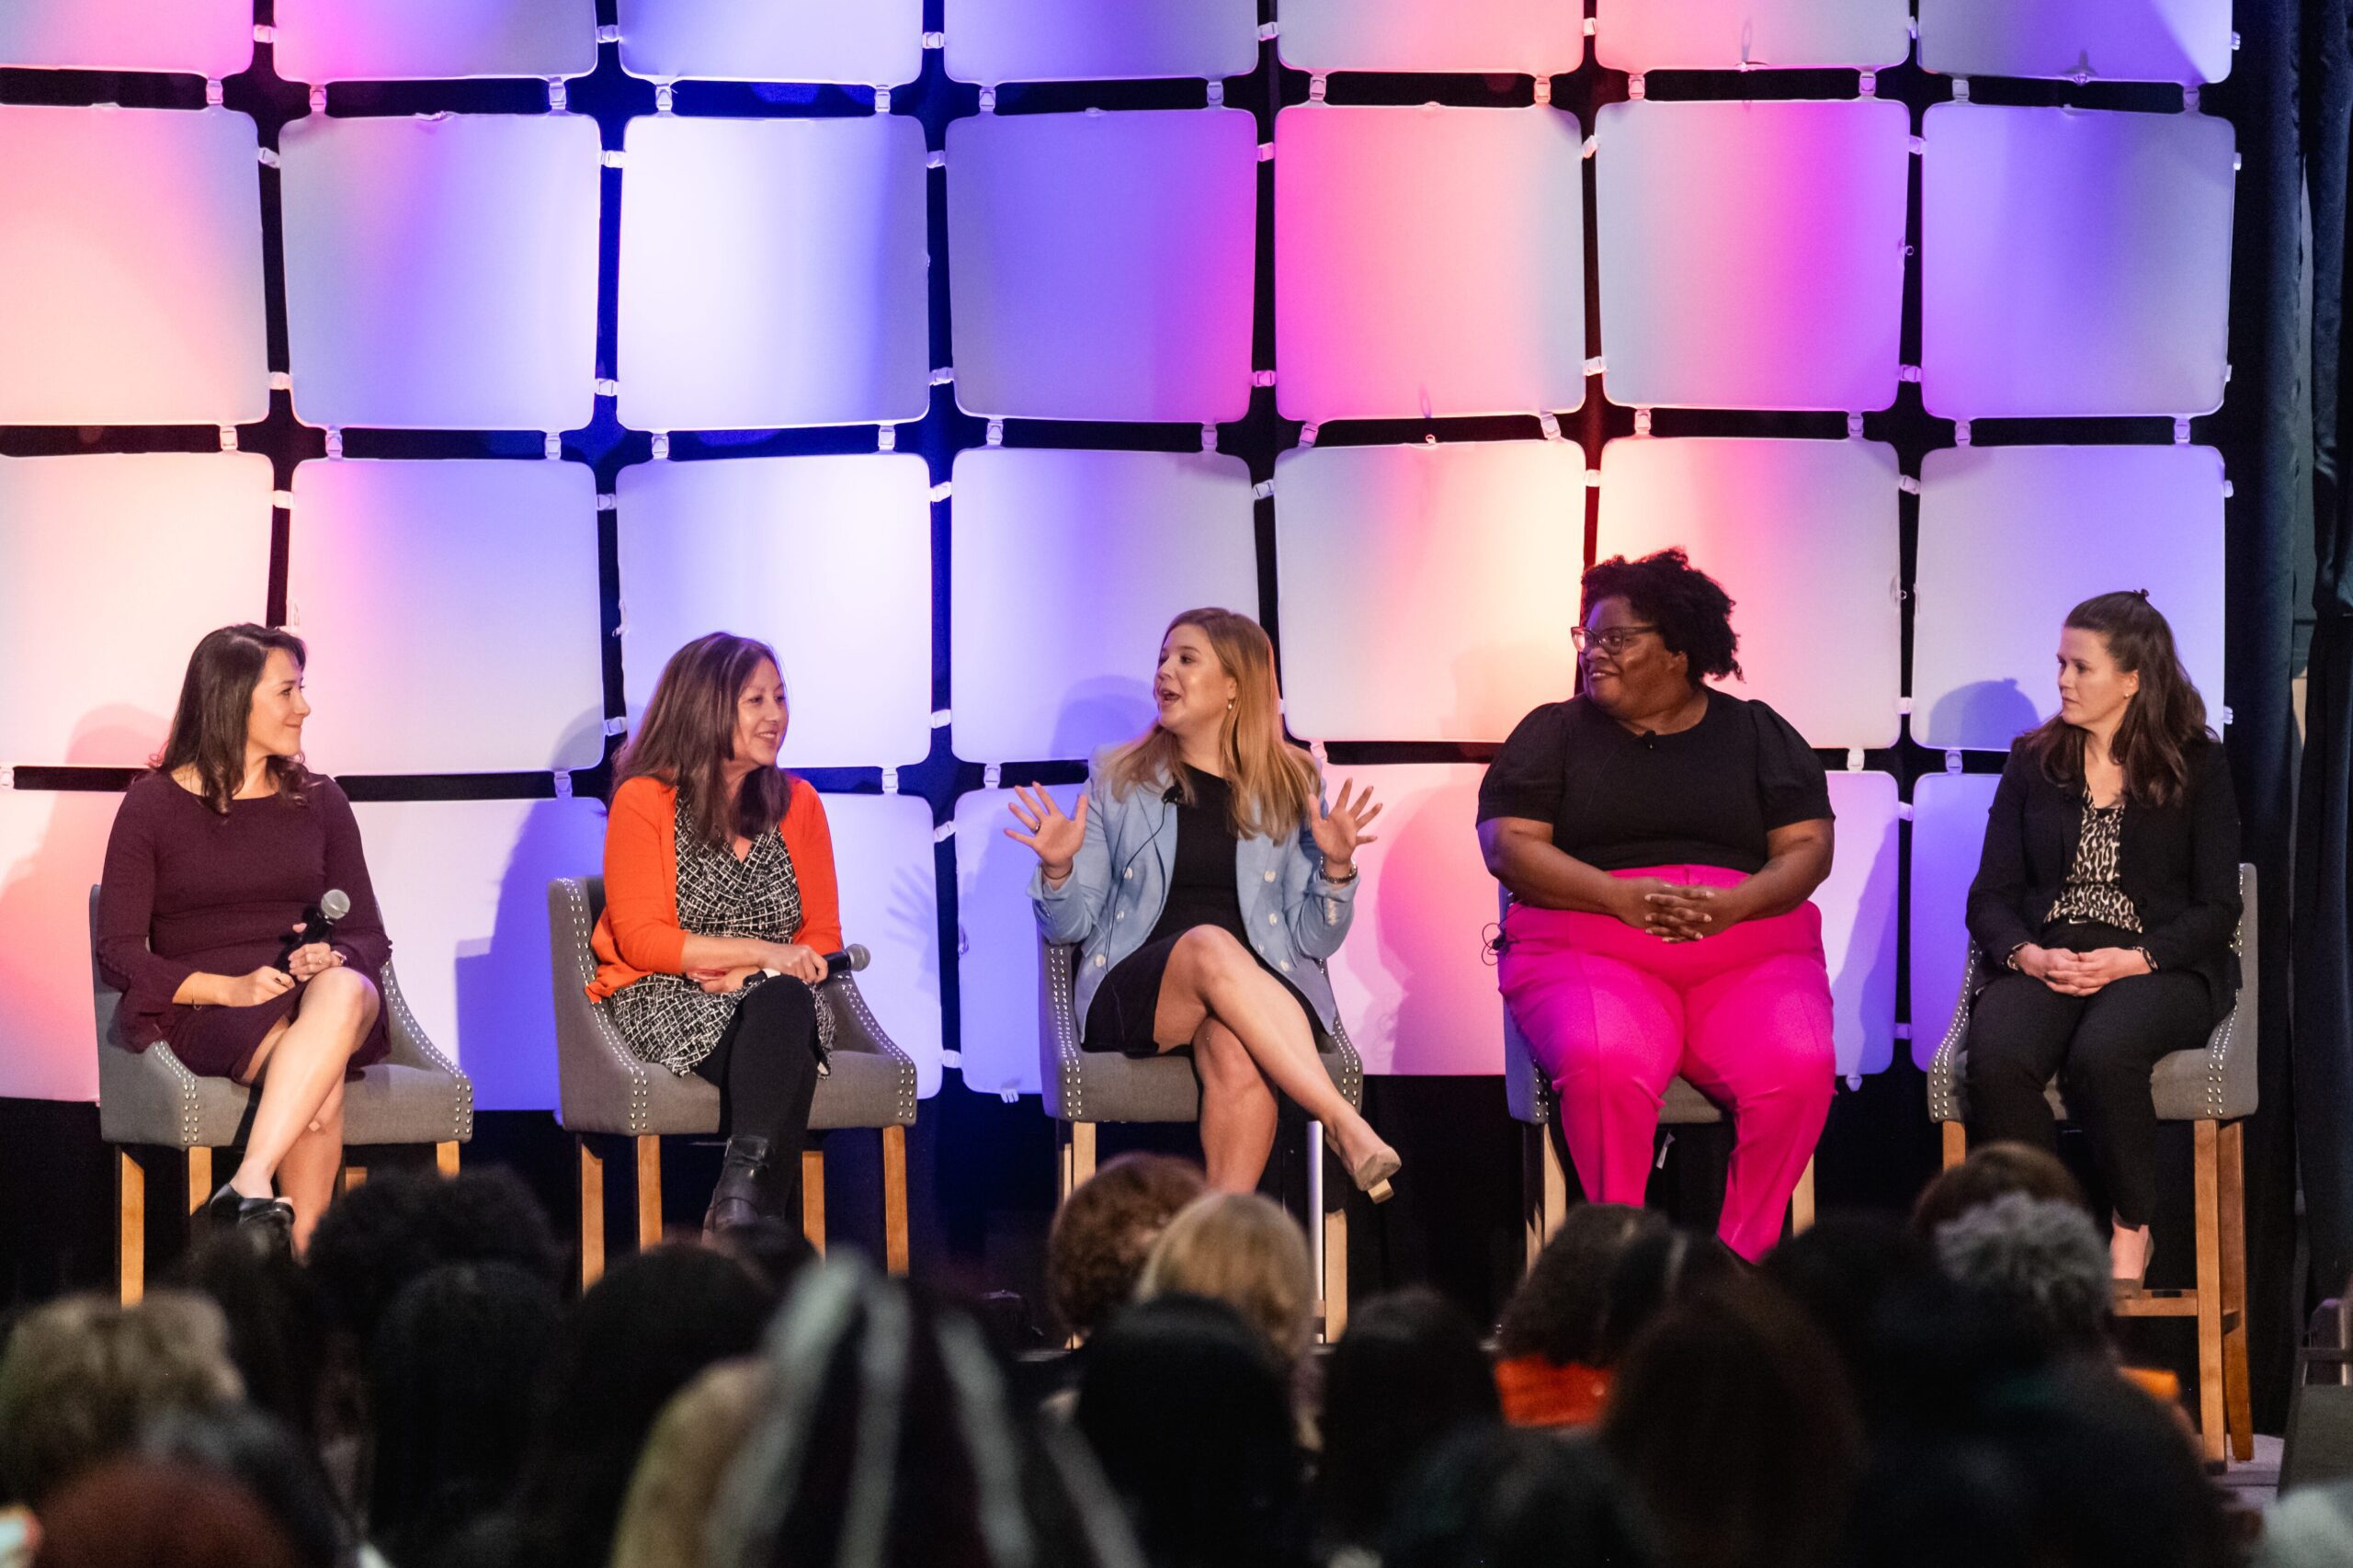 Five women sit in high stools on a stage during a panel discussion.